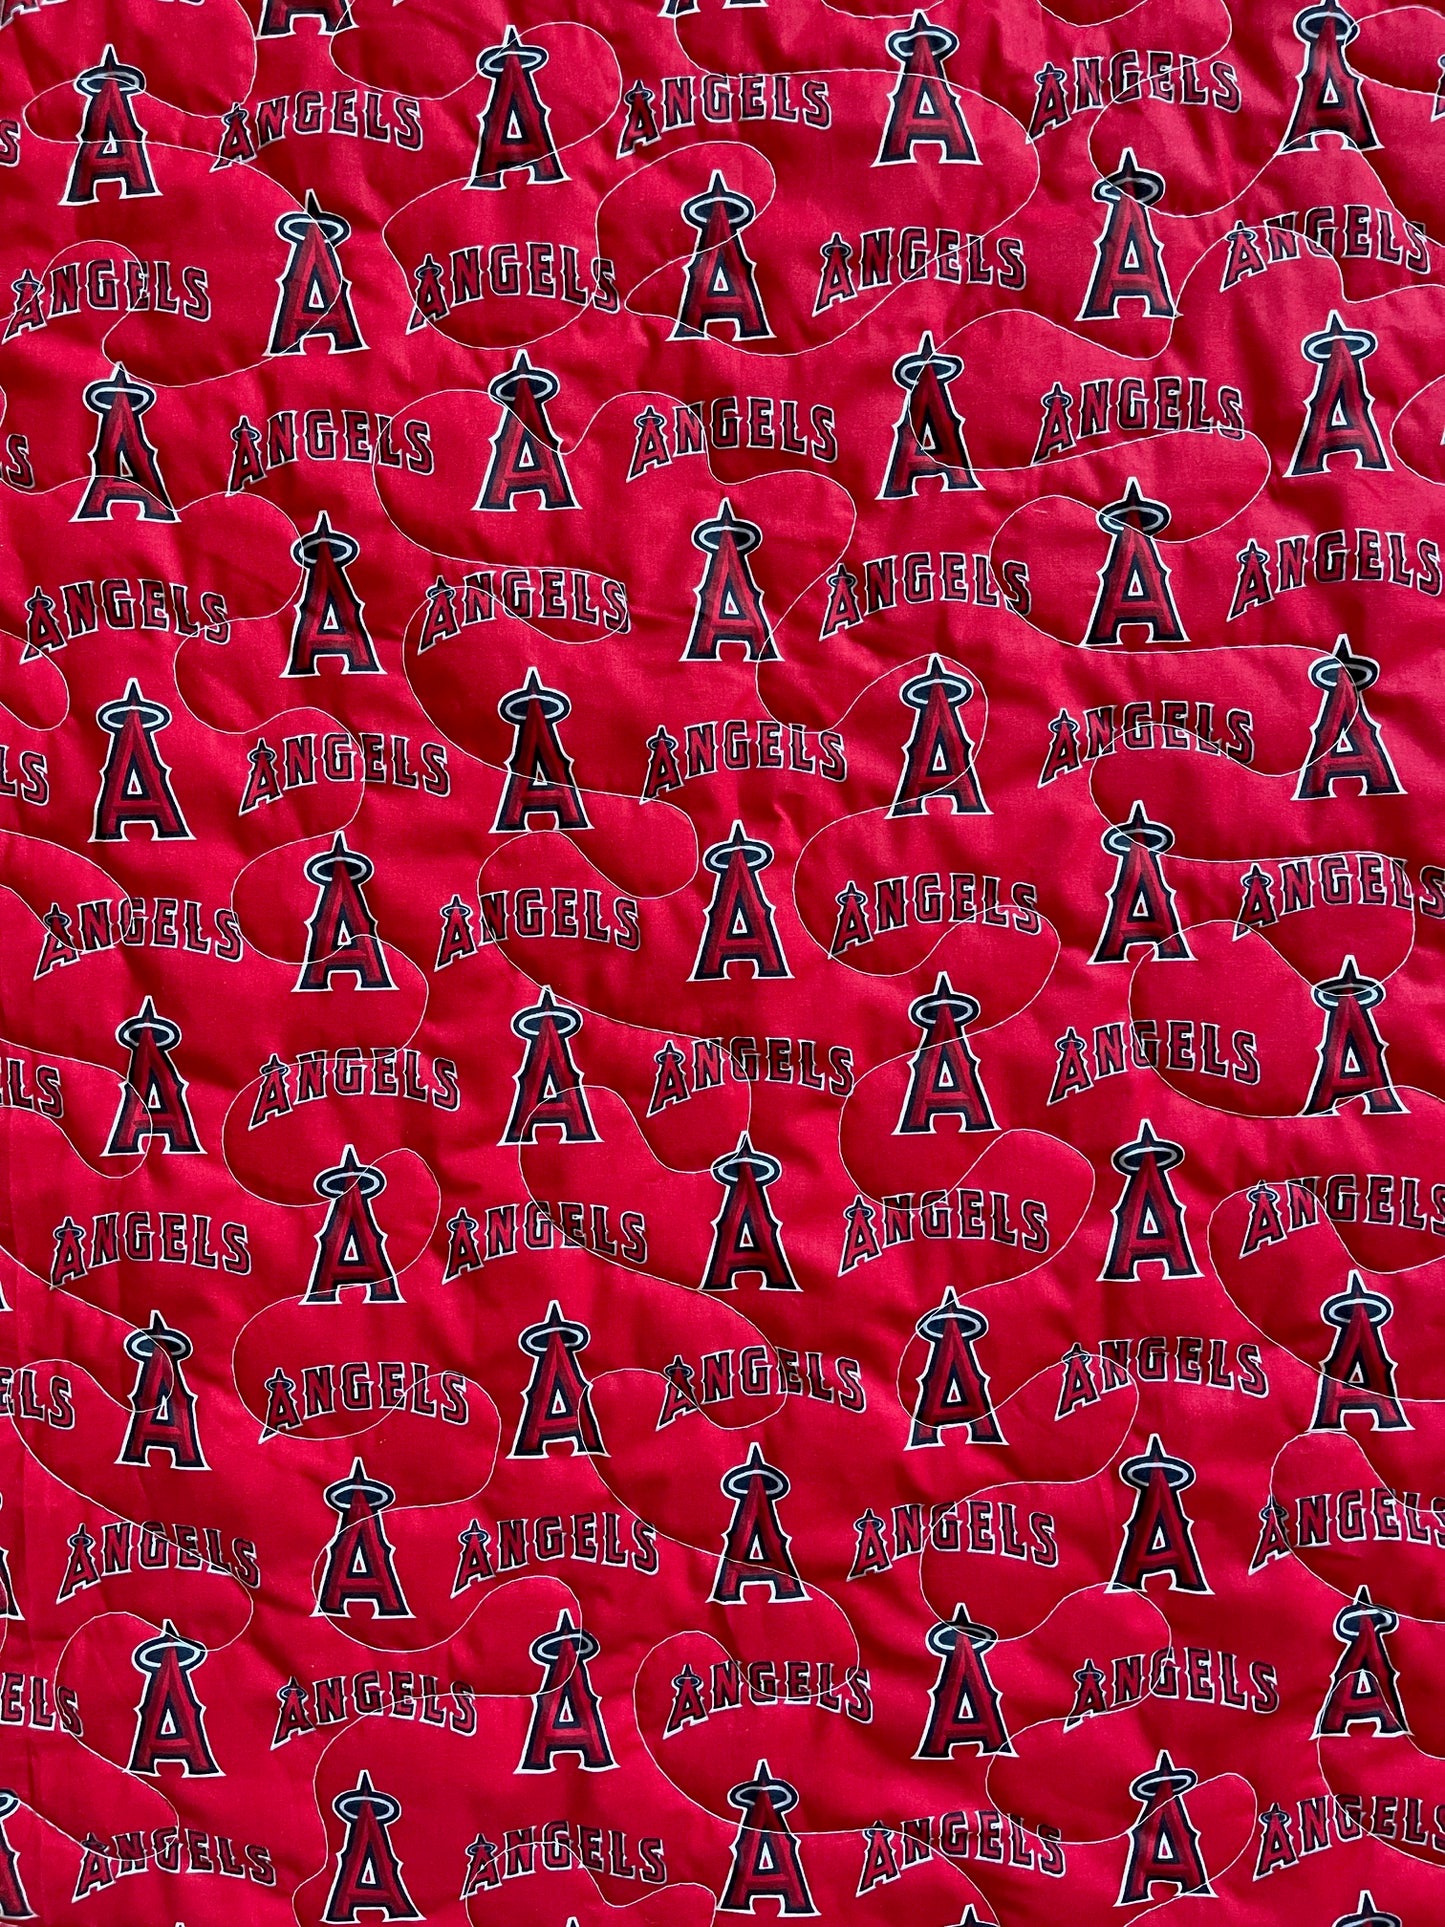 ANAHEIM ANGELS BASEBALL QUILTED BLANKET